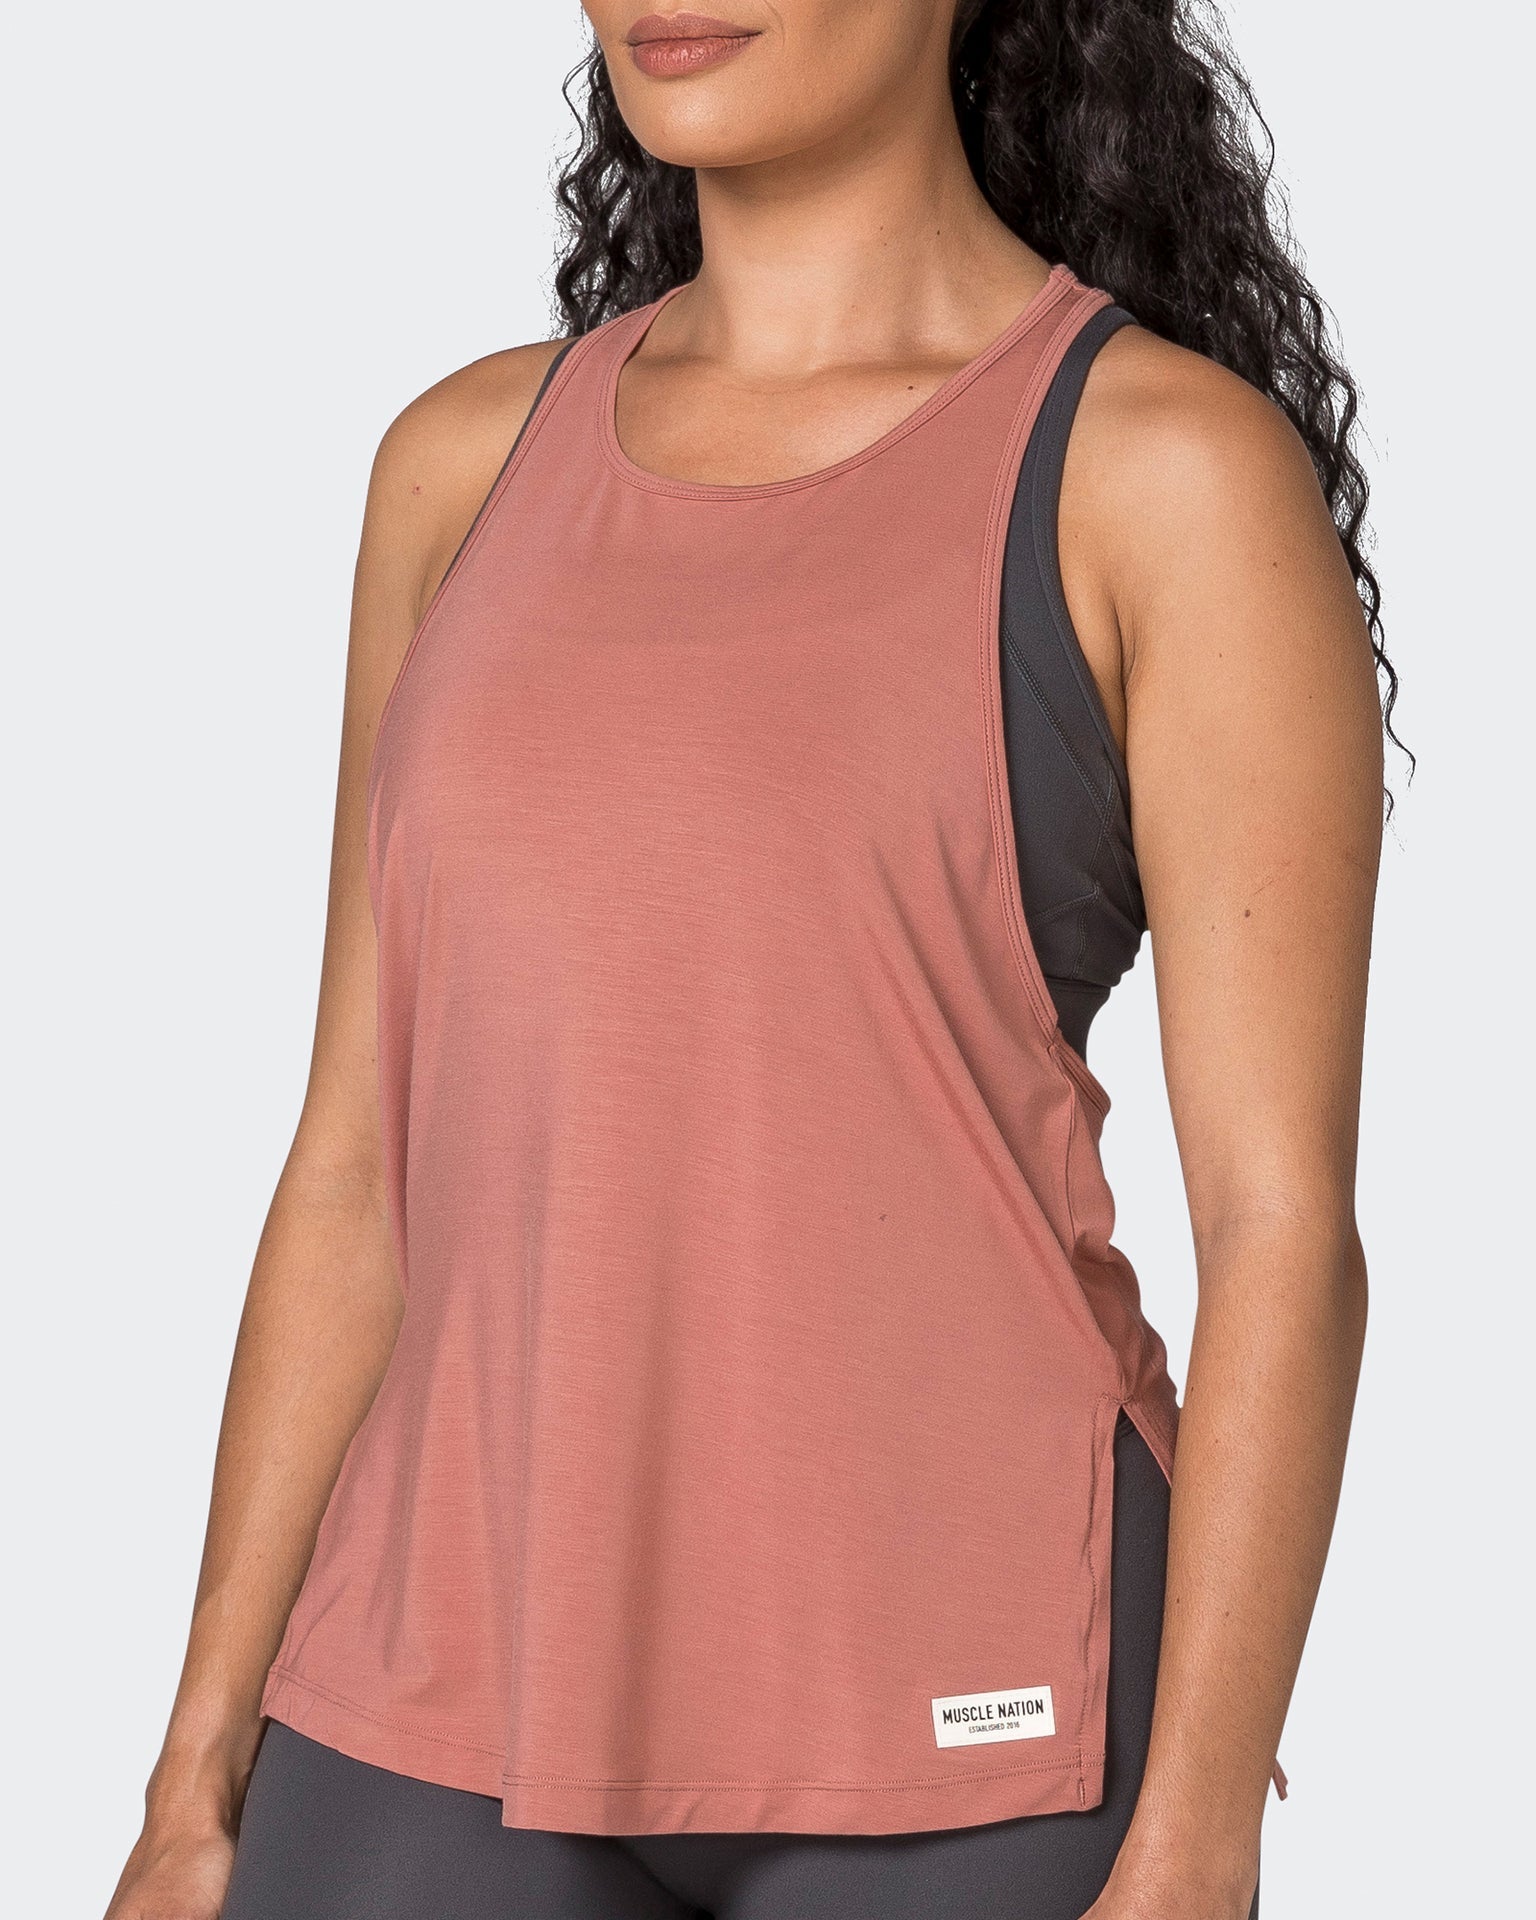 Muscle Nation Tank Tops Faster Gym Tank - Powdered Pink